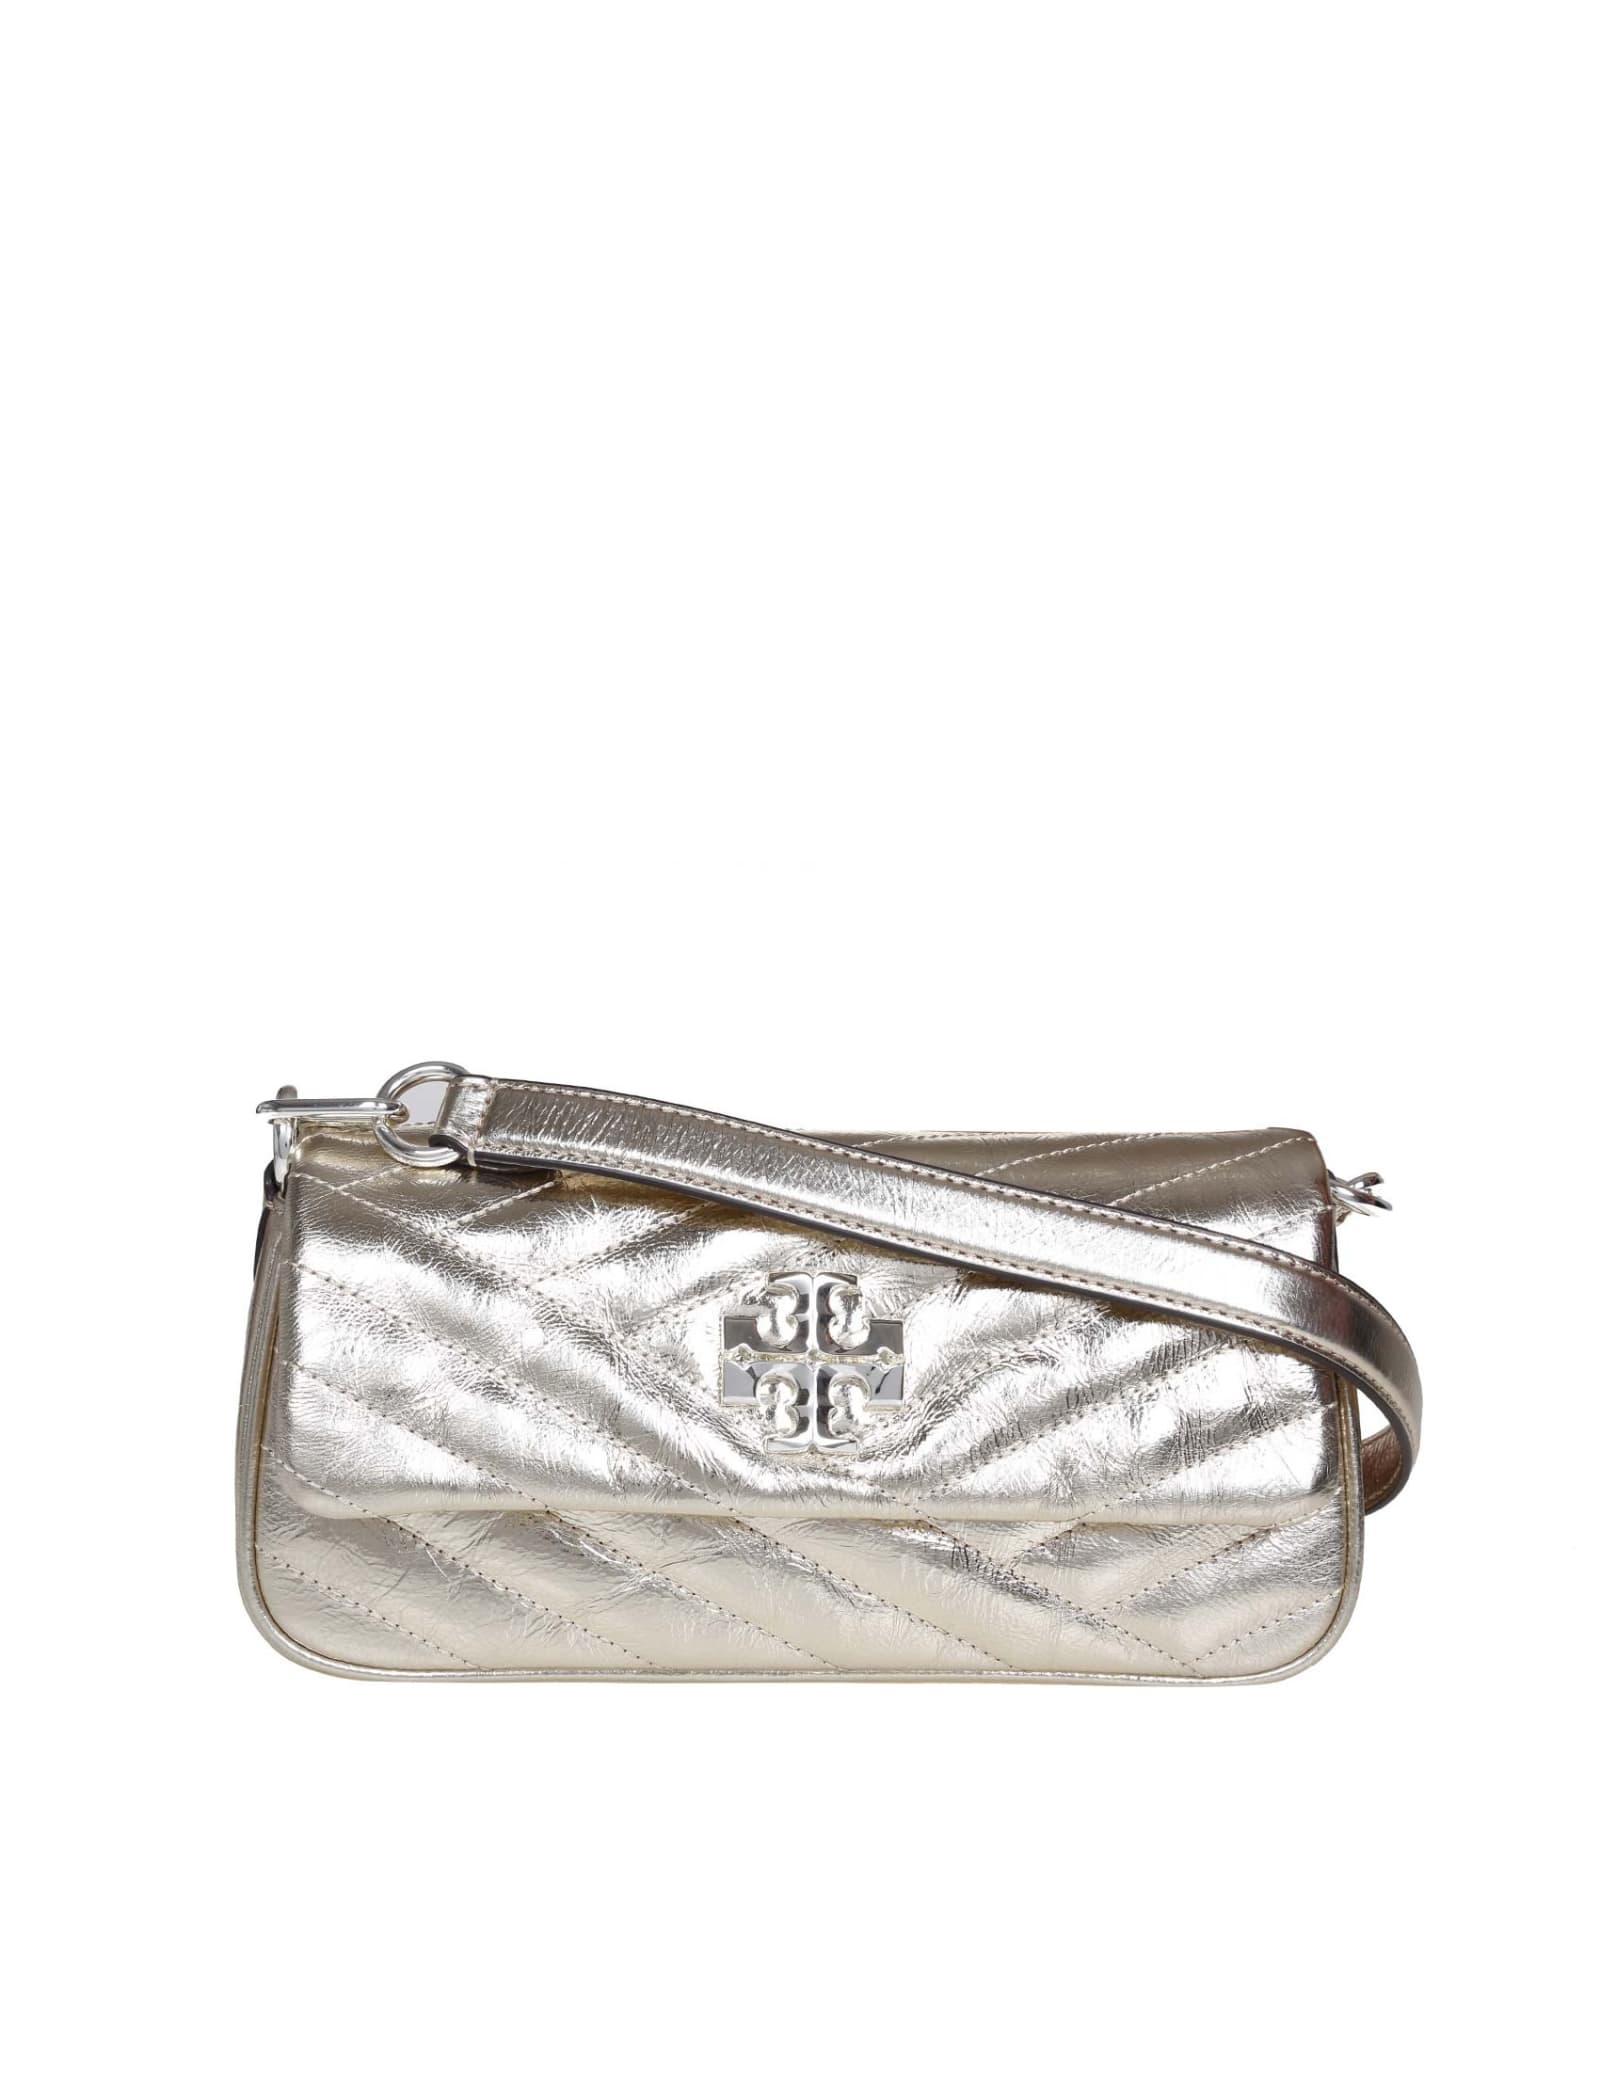 Tory Burch Kira Small Chevron In Laminated Leather With Flap